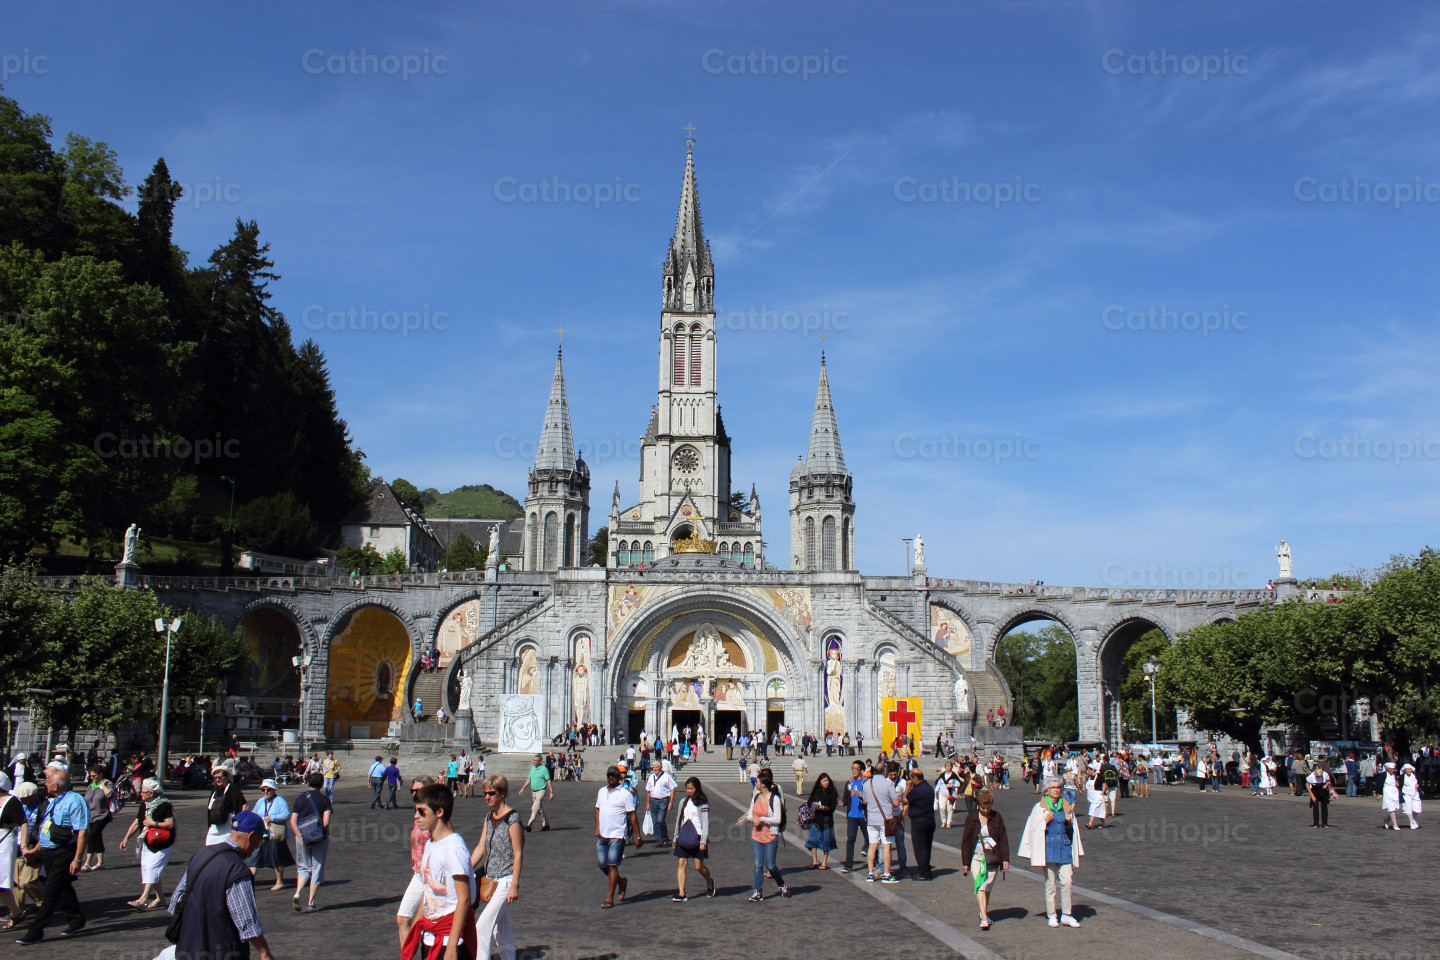 Lourdes Cathedral photo - Cathopic